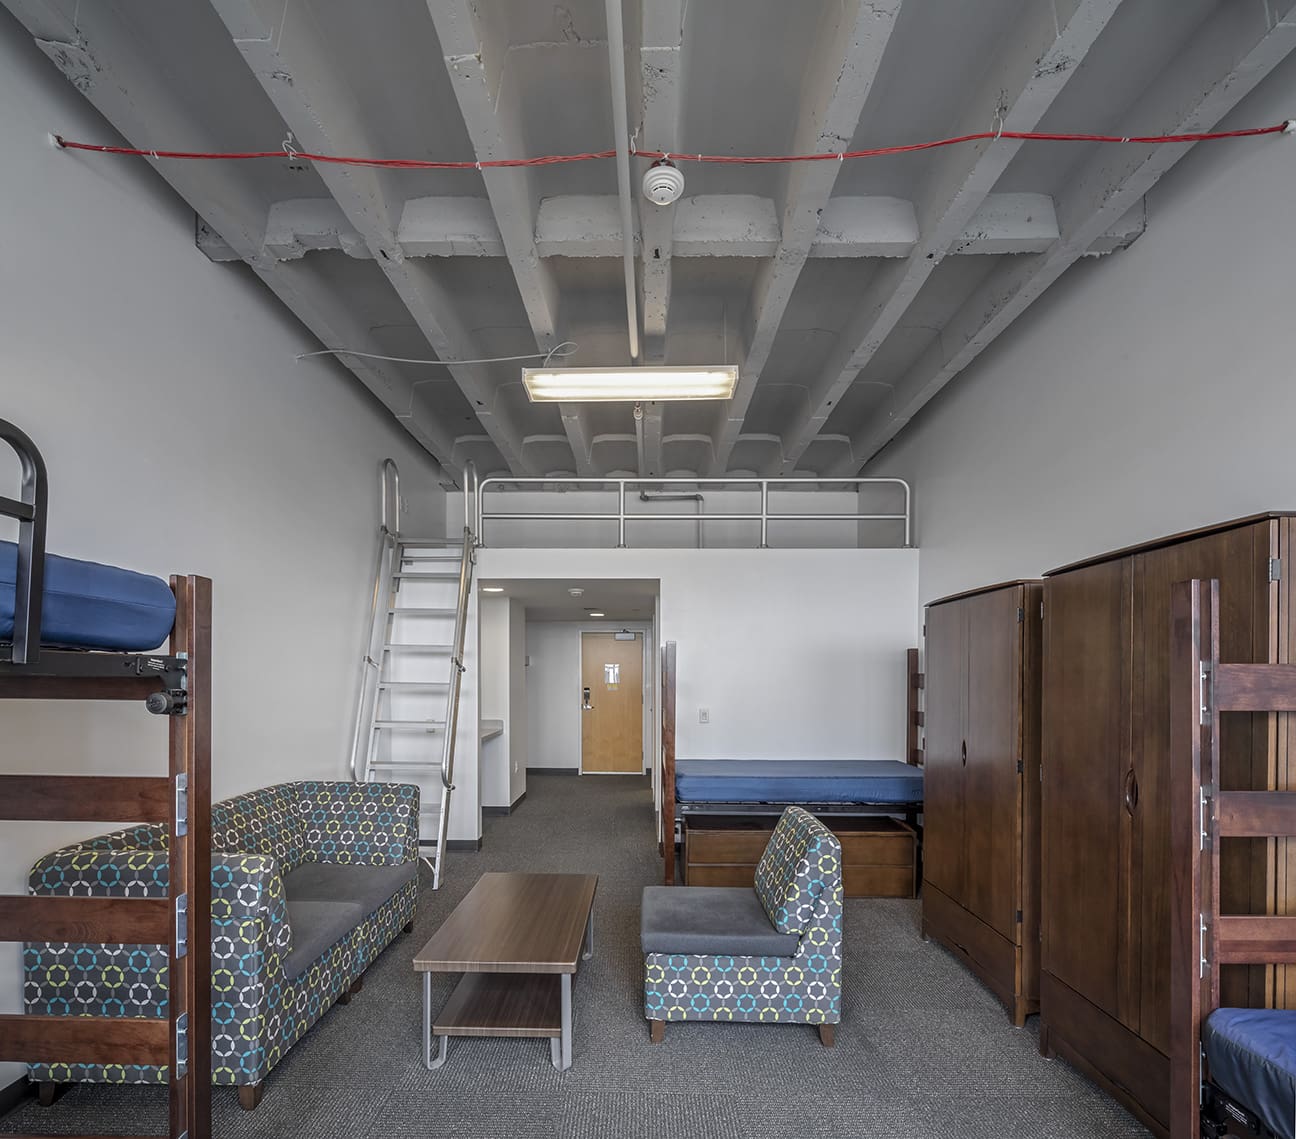 A photograph of a three person dorm room in the Taubman Center student housing.